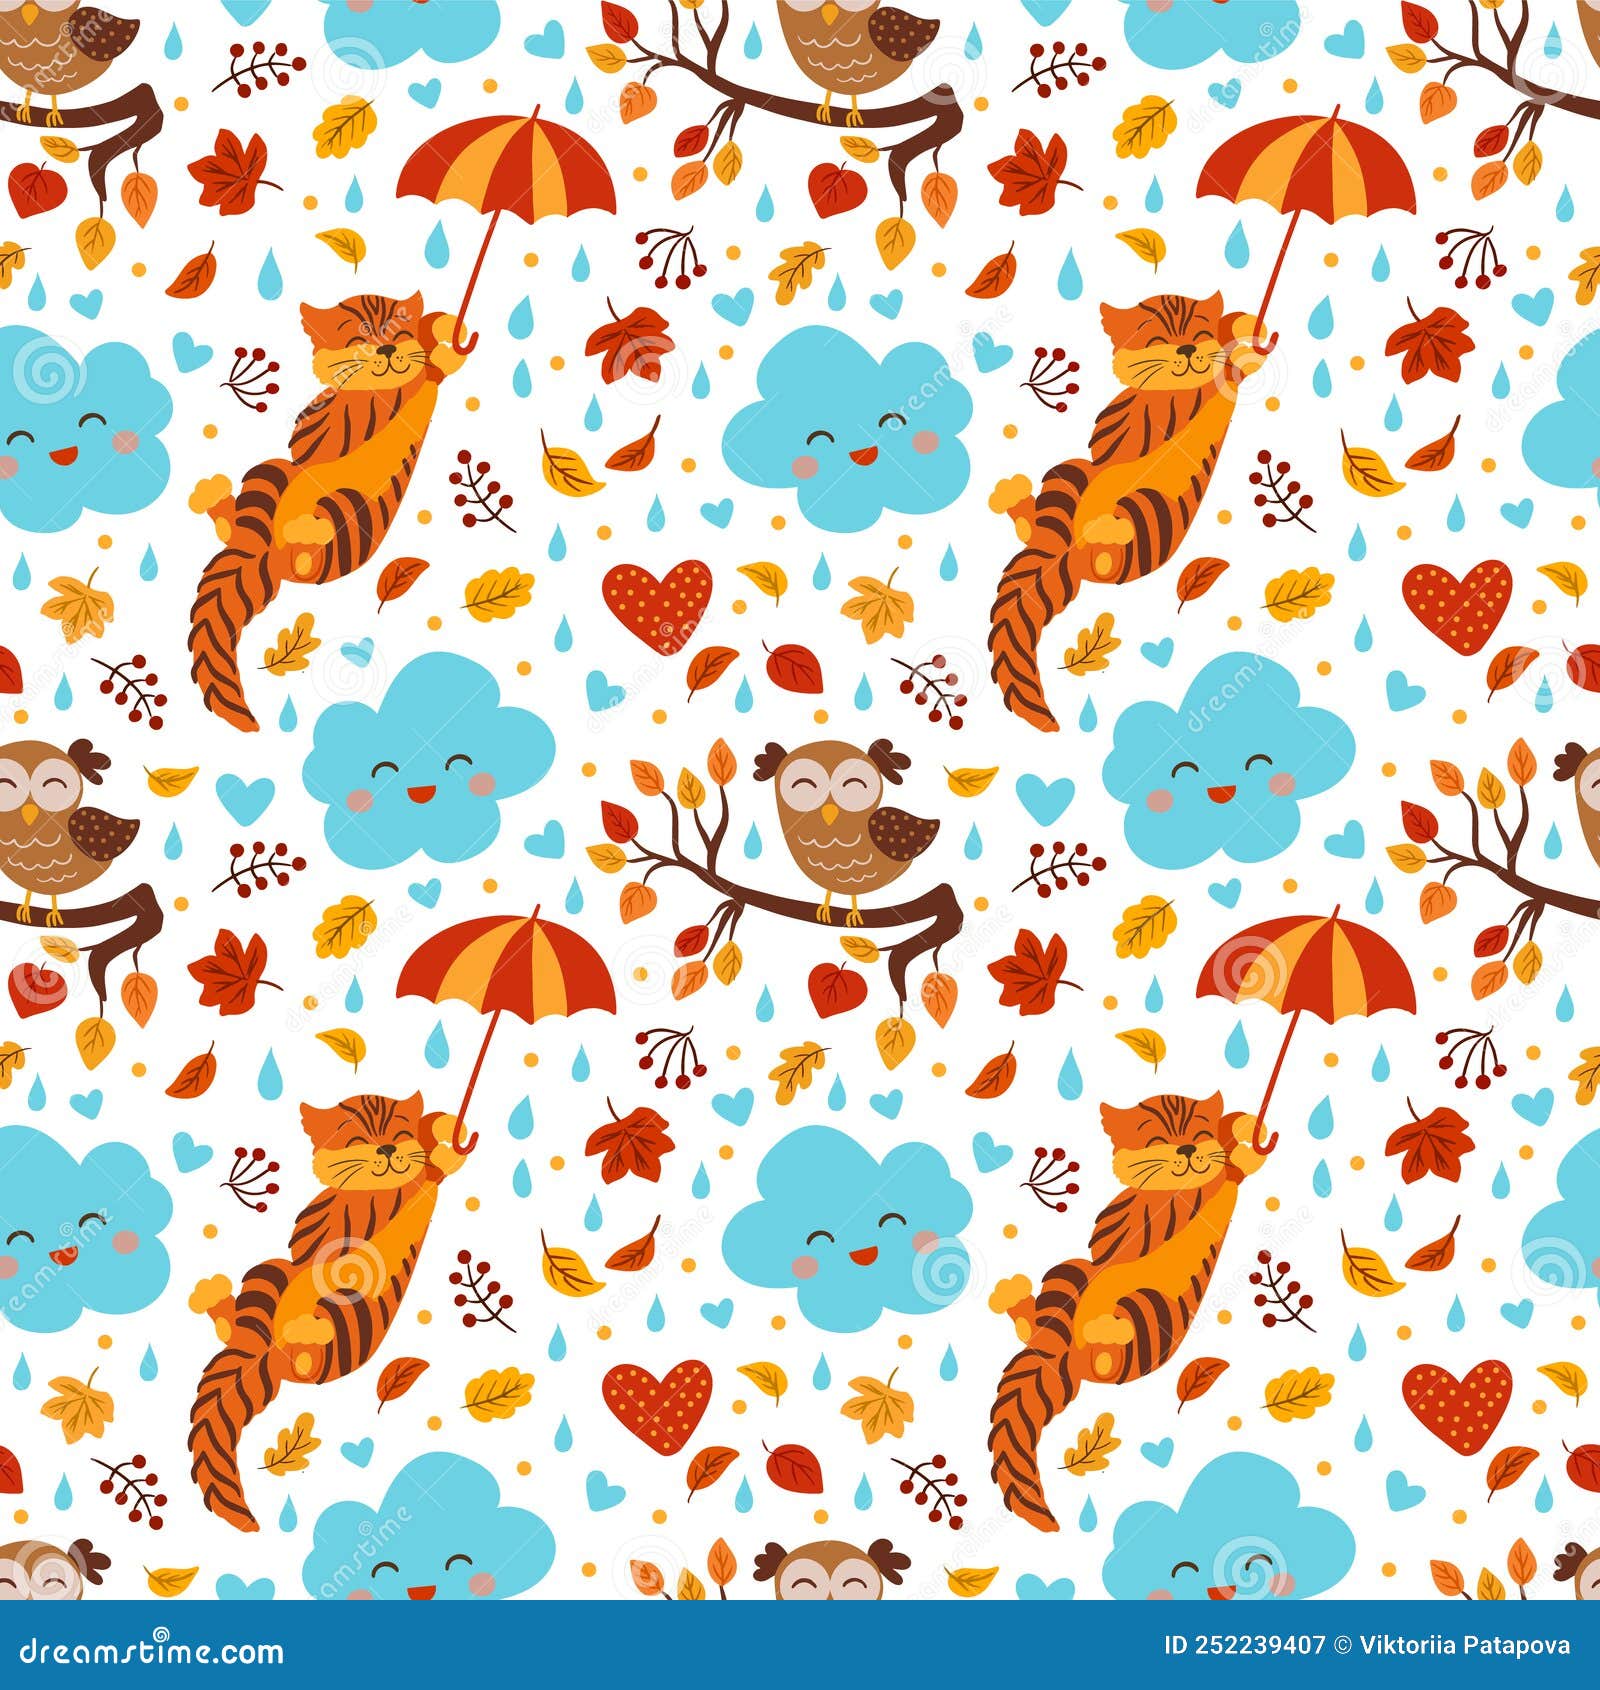 autumn  seamless pattern with cutecat, owl, mushrooms and falling leaves